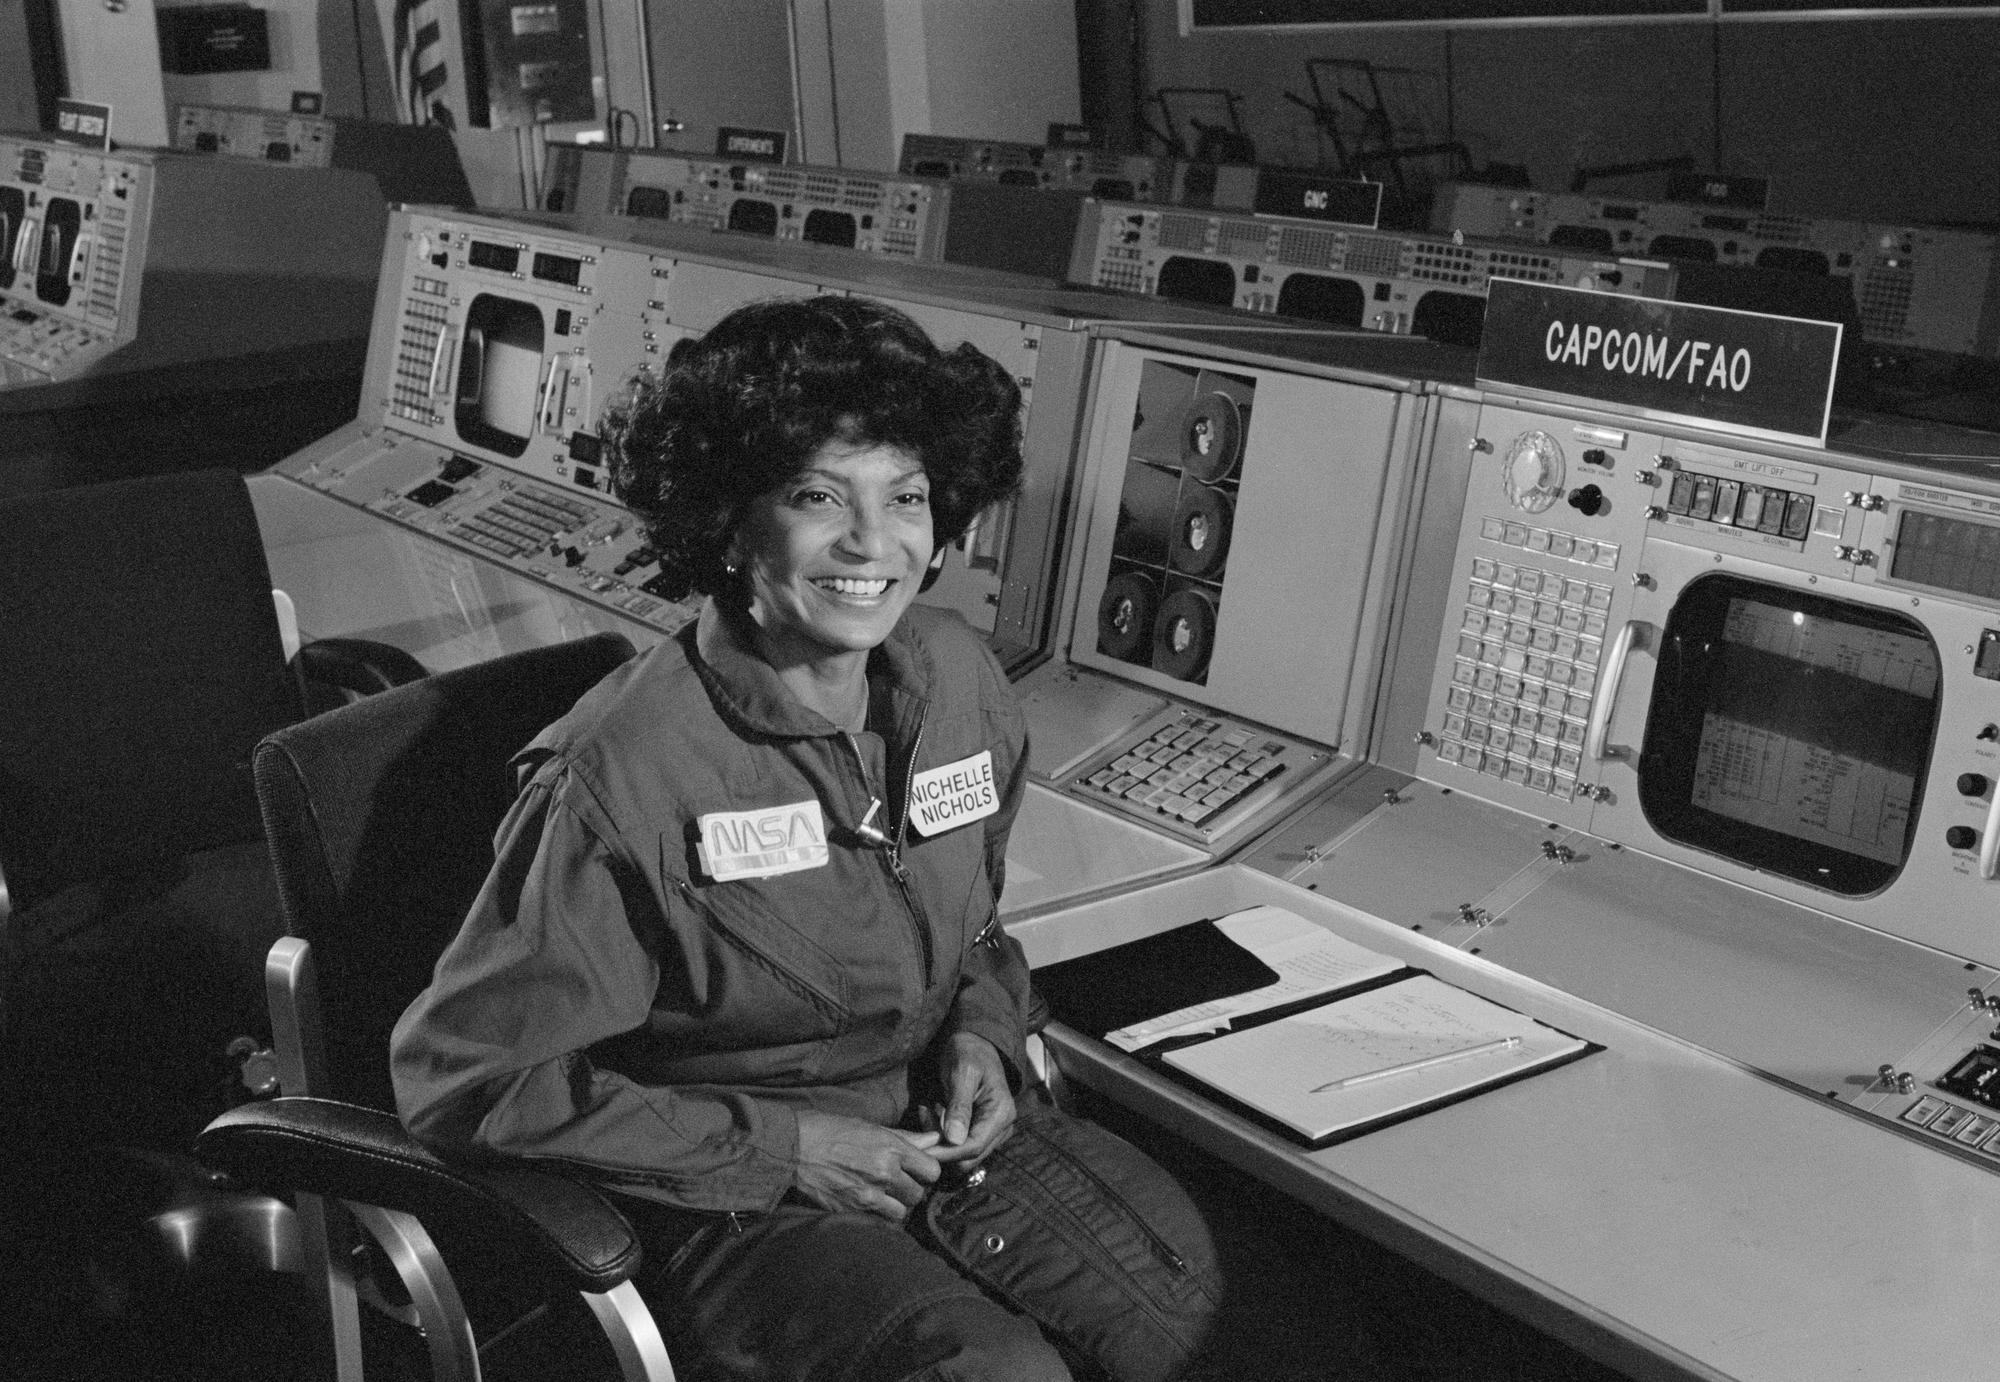 Nichelle Nichols sits in NASA mission control and smiles. She is wearing a flightsuit with her name on it.